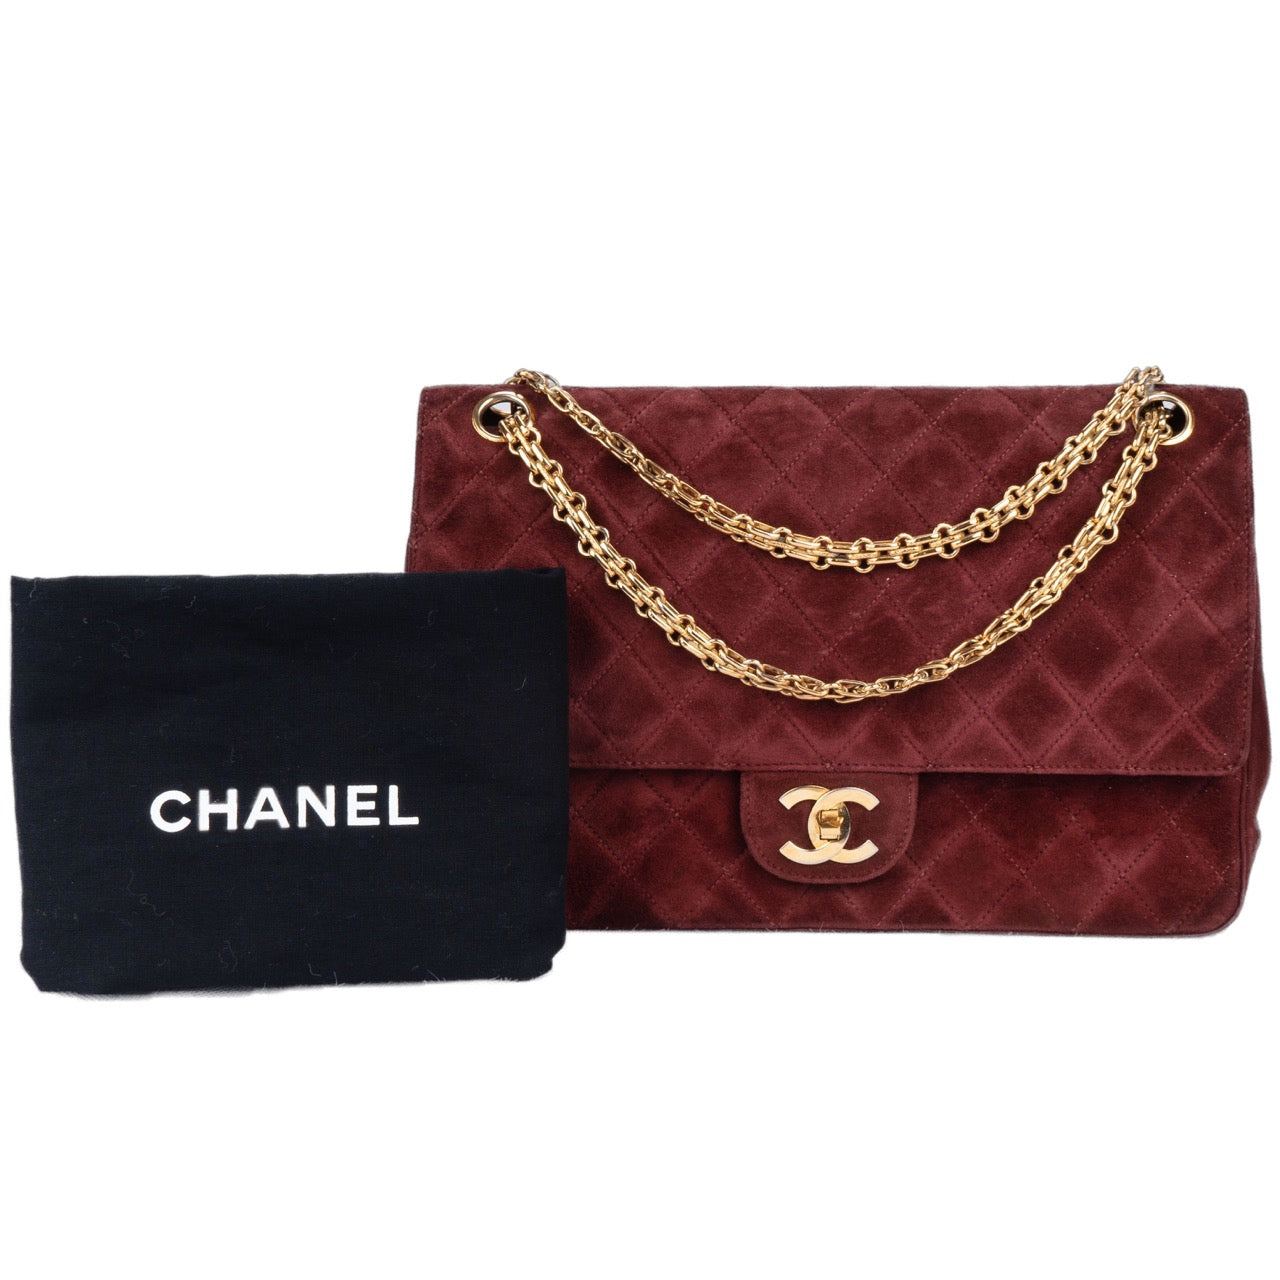 Chanel Quilted Suede Leather Double Flap Bag